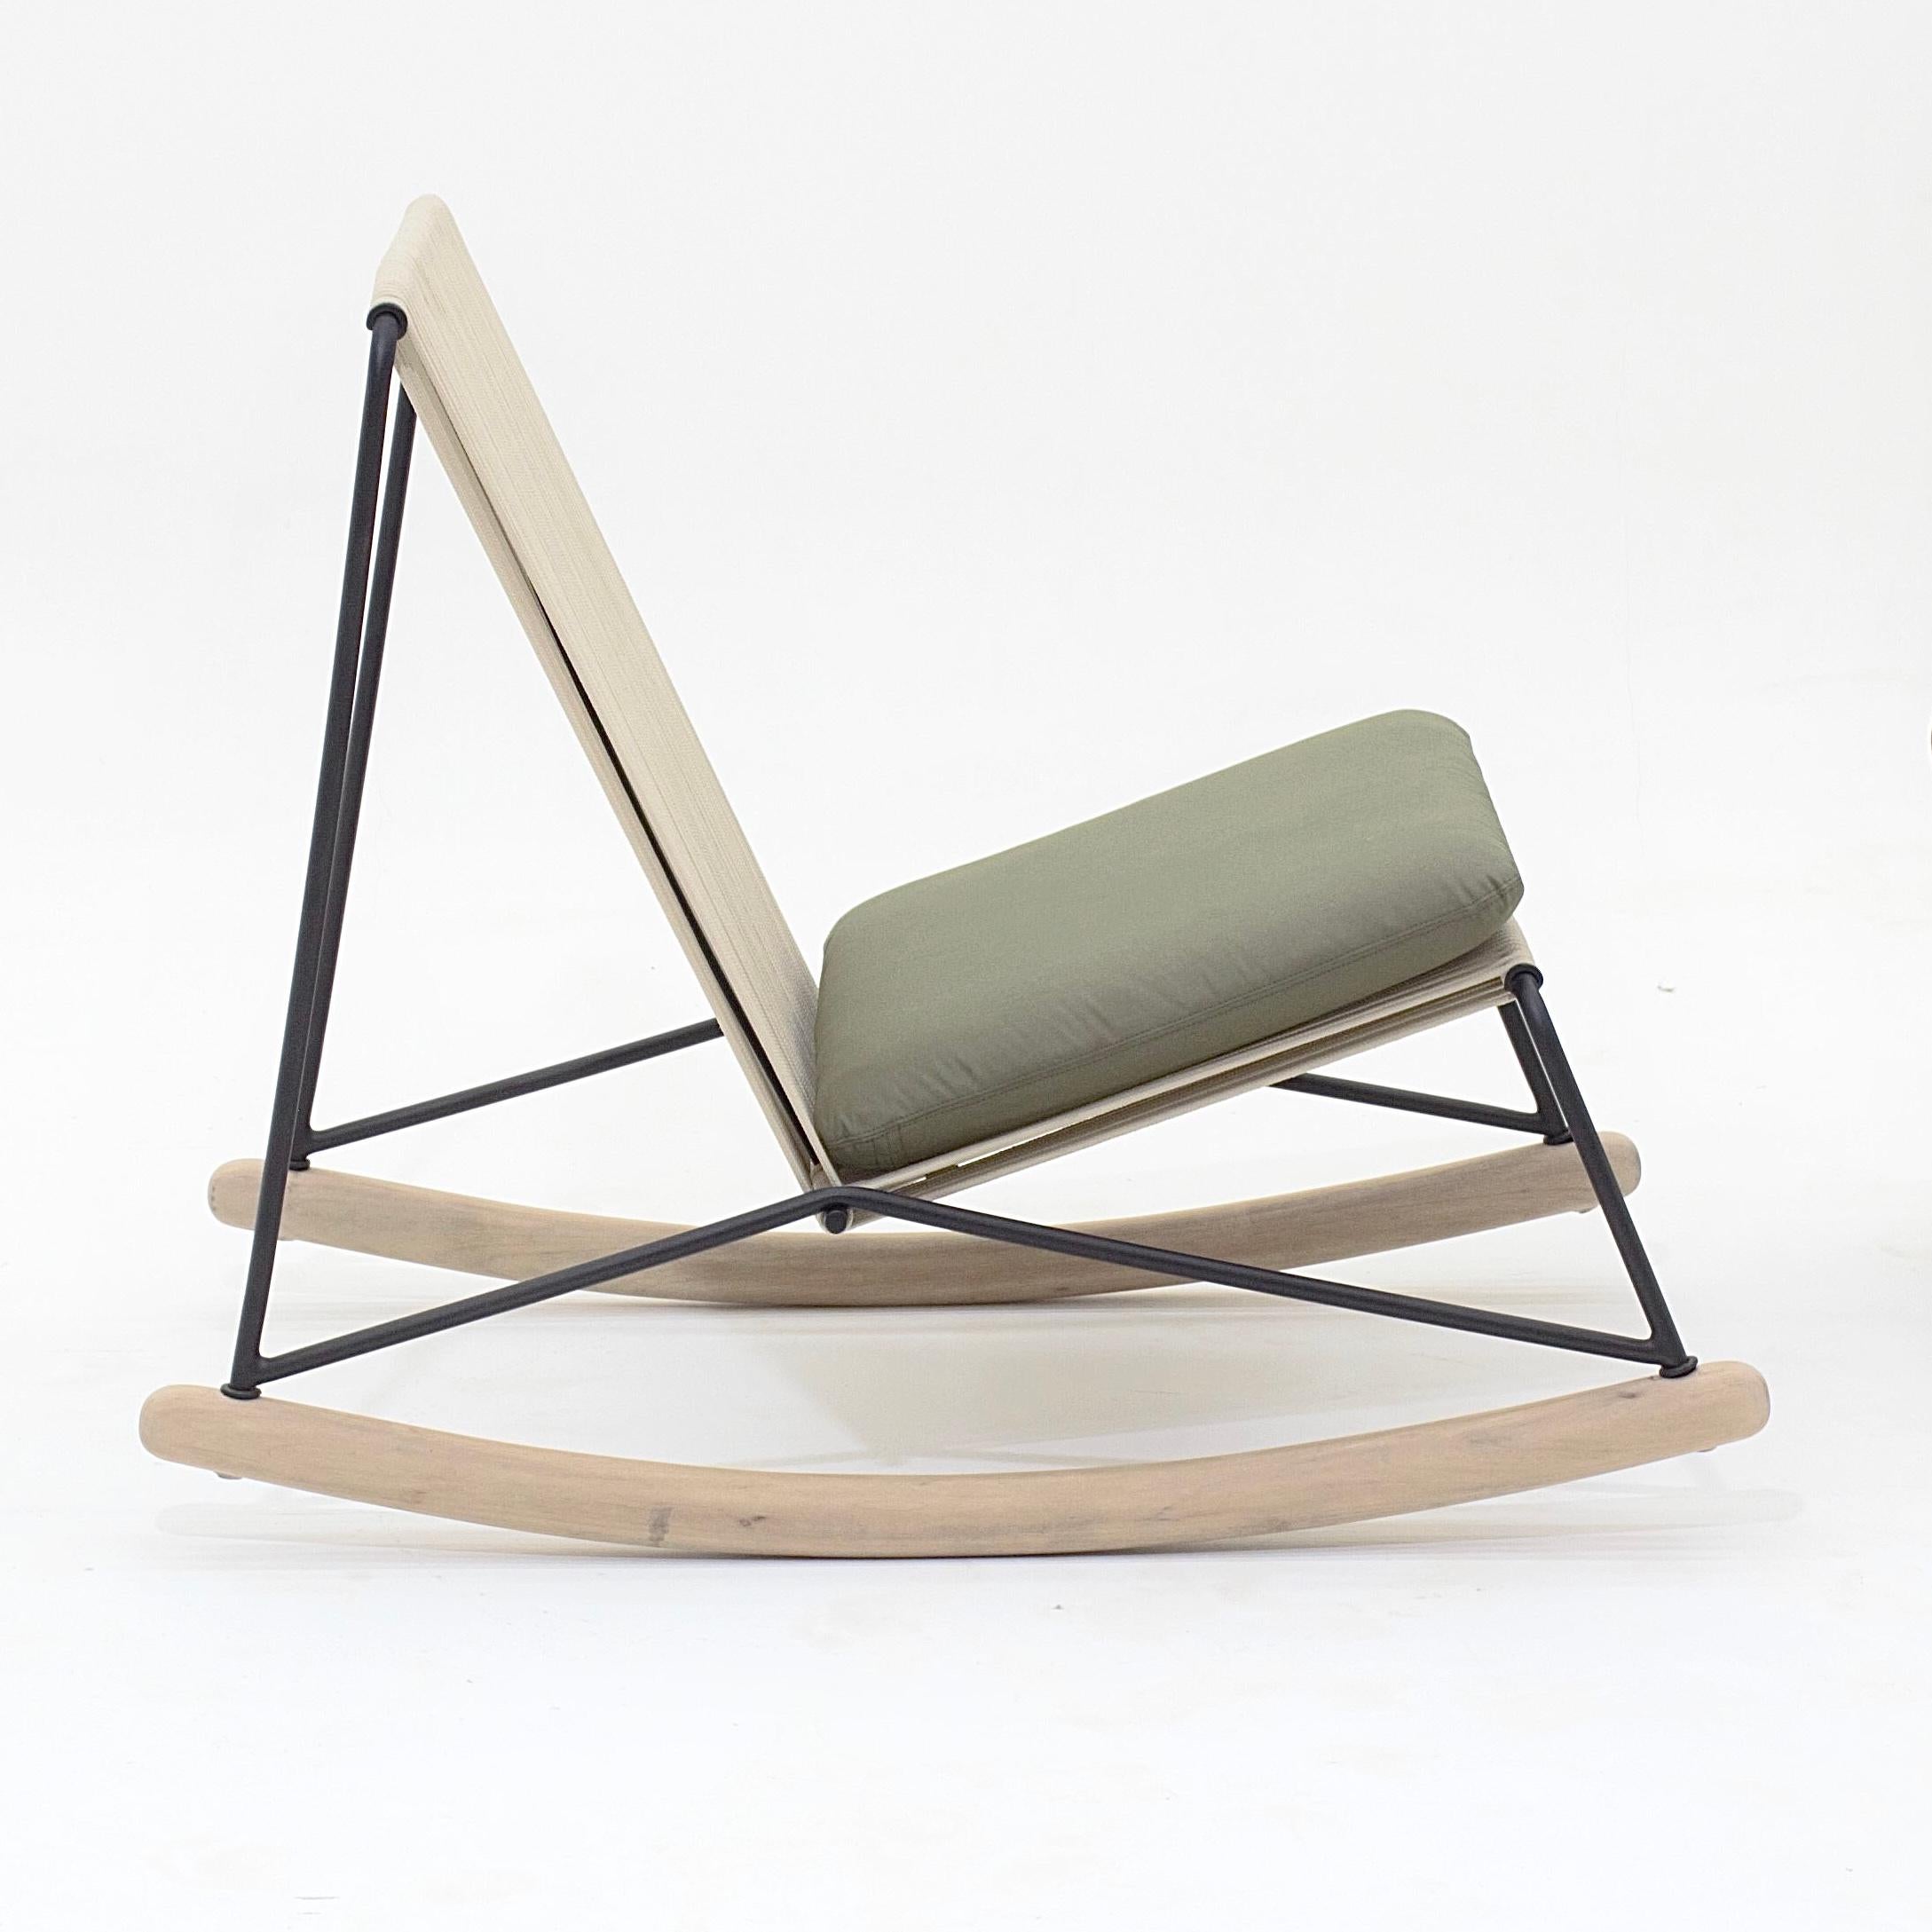 This minimalist rocking chair in stainless steel, nautical rope, wood and tapestry is designed within architectonic and geometric reasoning. All elements constitute its functioning and are sized to ensure stability and confort with the minimum of